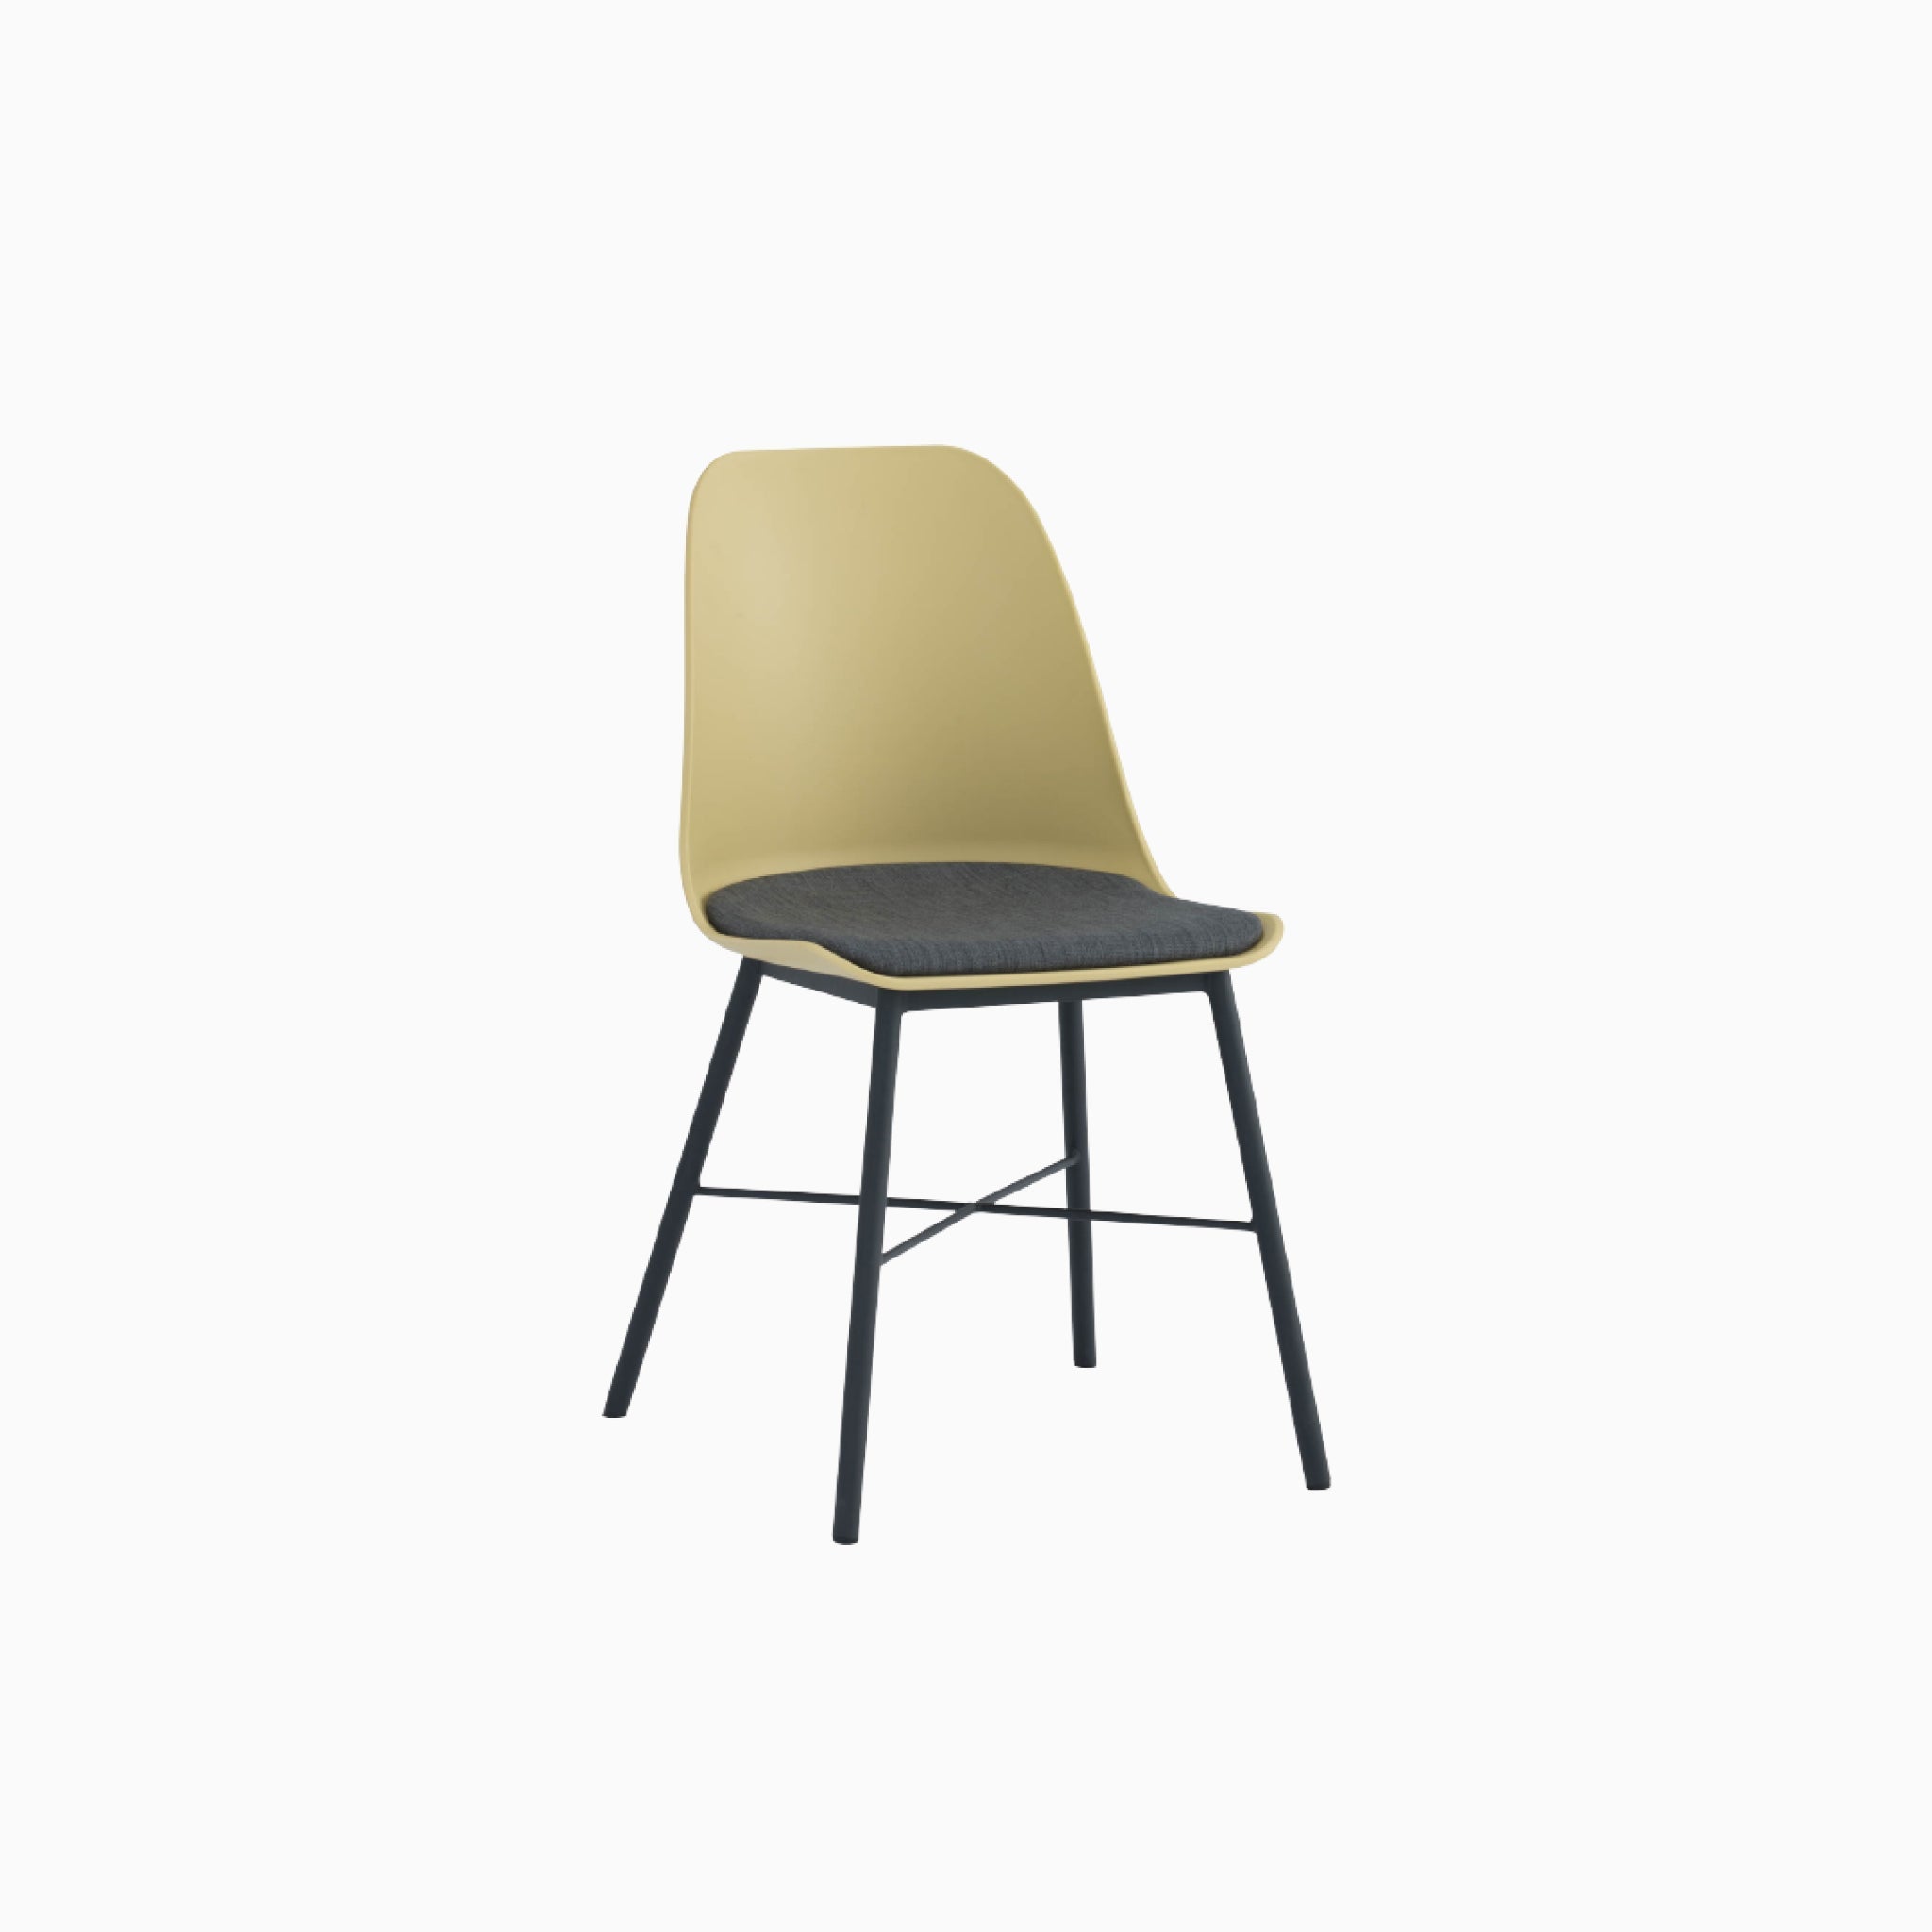 Lumo Yellow Dining Chair with Black Leg (Set of 2)